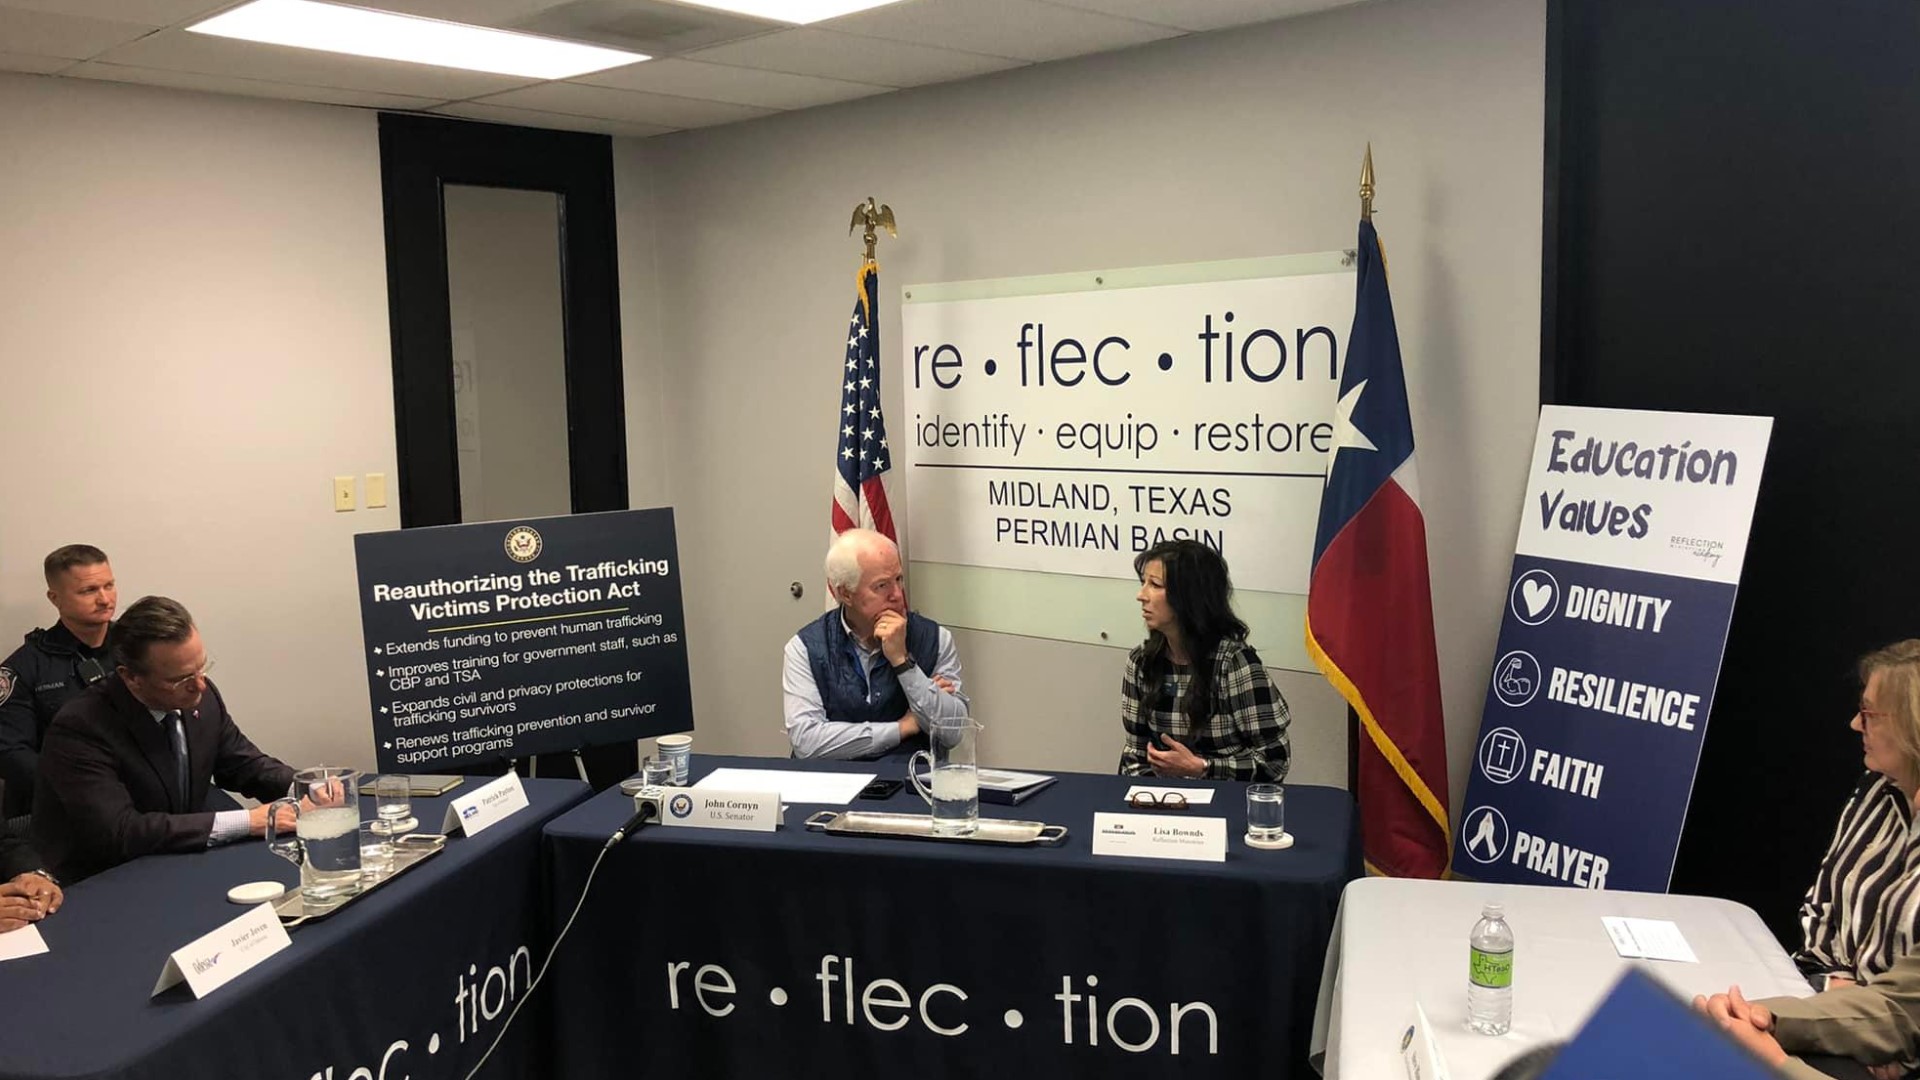 Cornyn visited Midland to talk about reauthorizing the Trafficking Victims Protection Act and to tour Reflection Ministries.